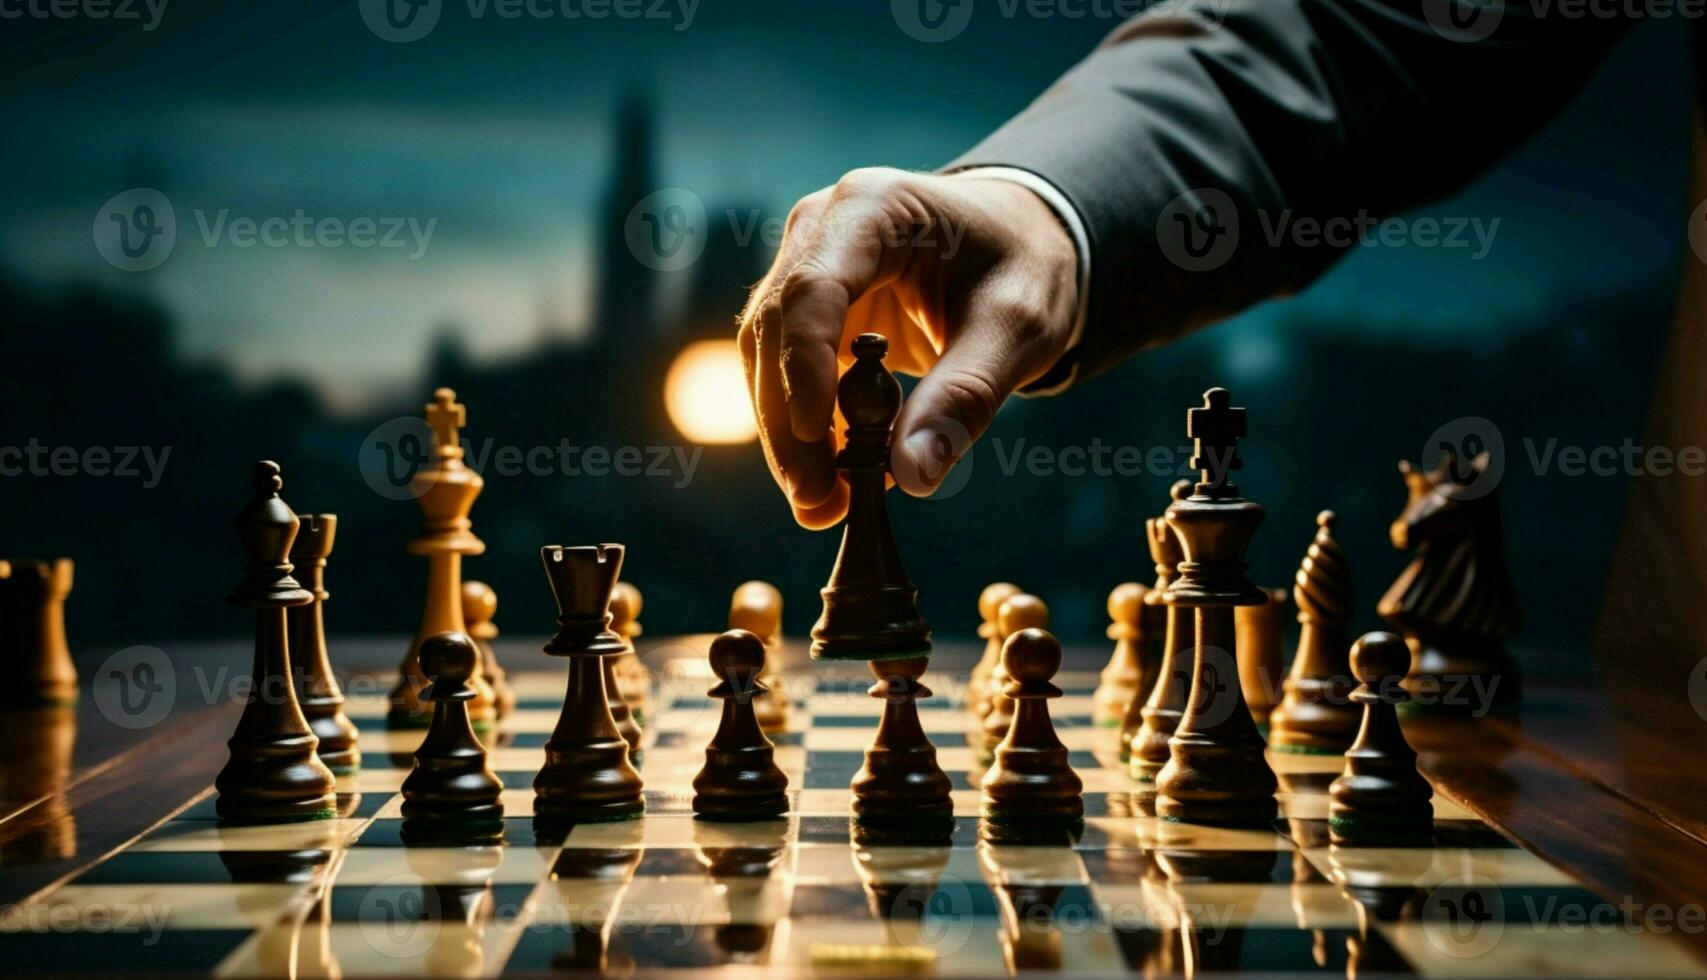 5+ Thousand Chess 2 Players Royalty-Free Images, Stock Photos